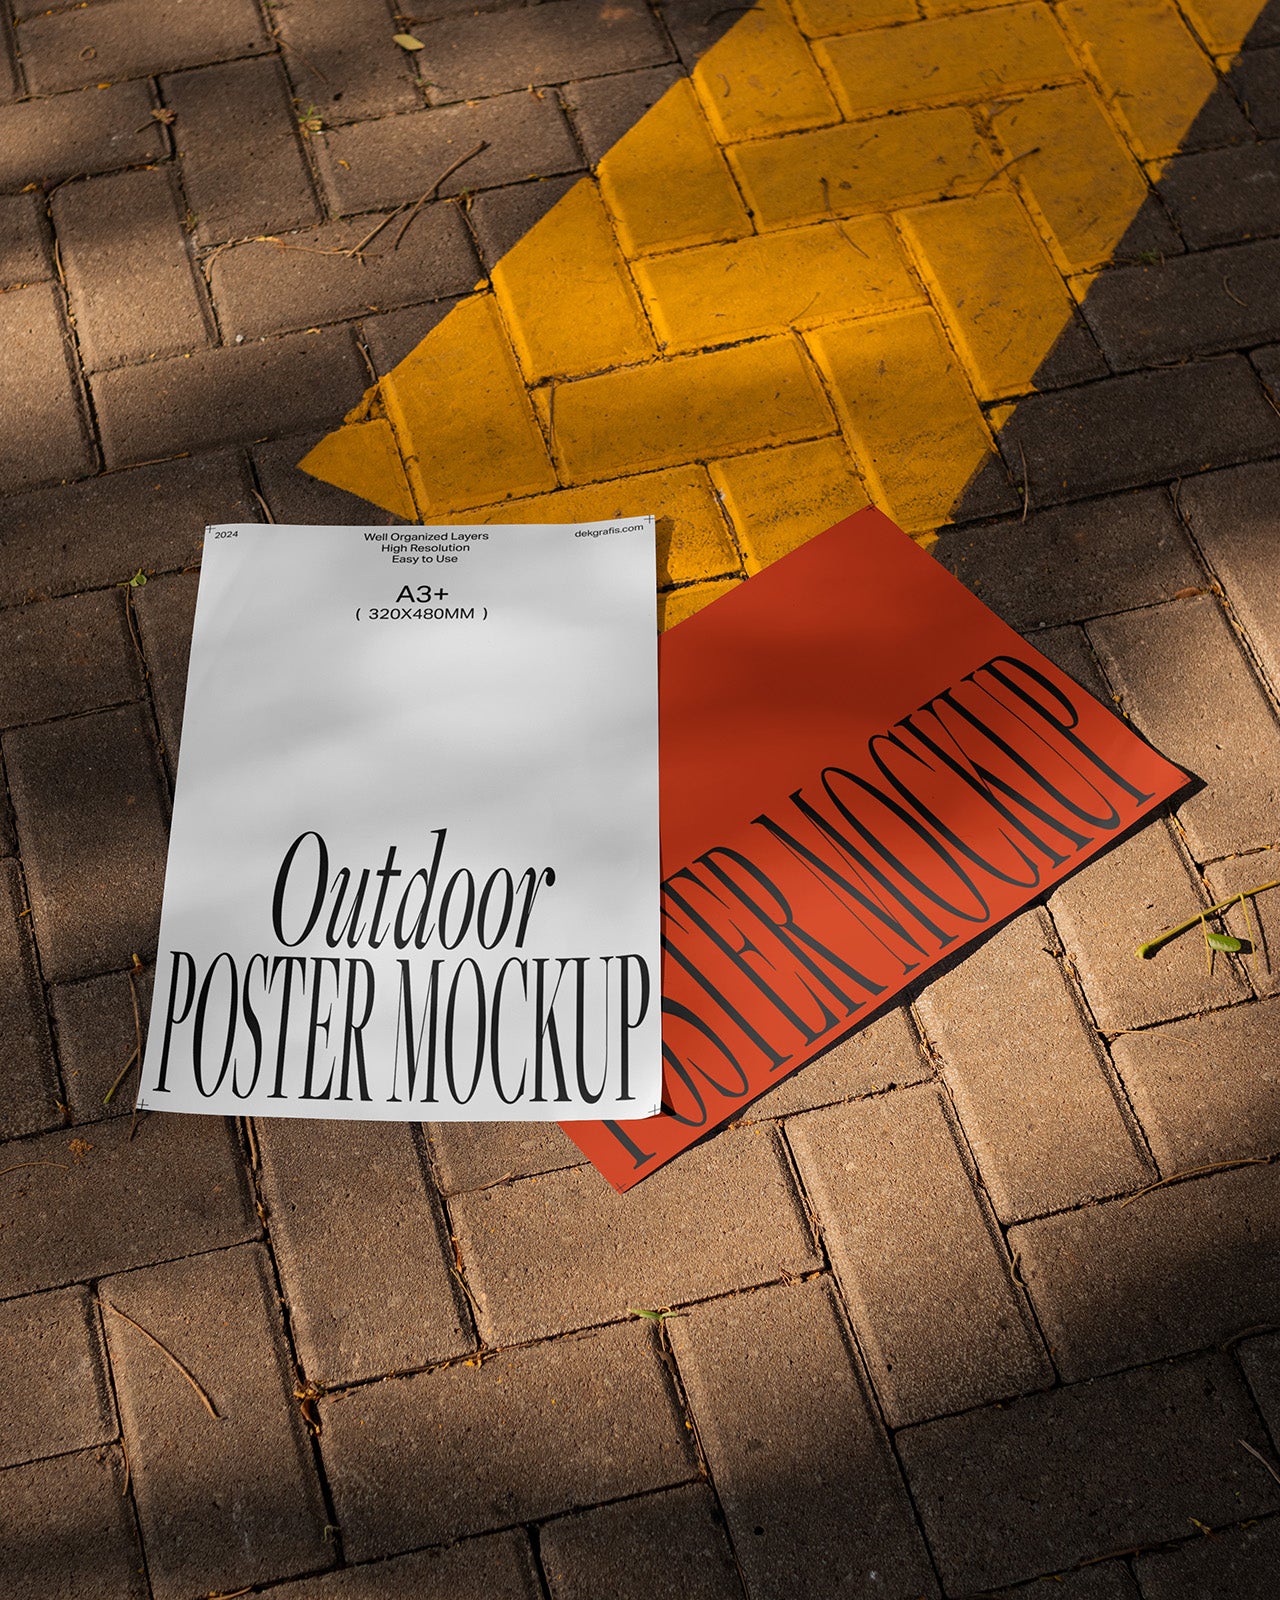 5 Outdoor A3+ Poster Mockups 2024